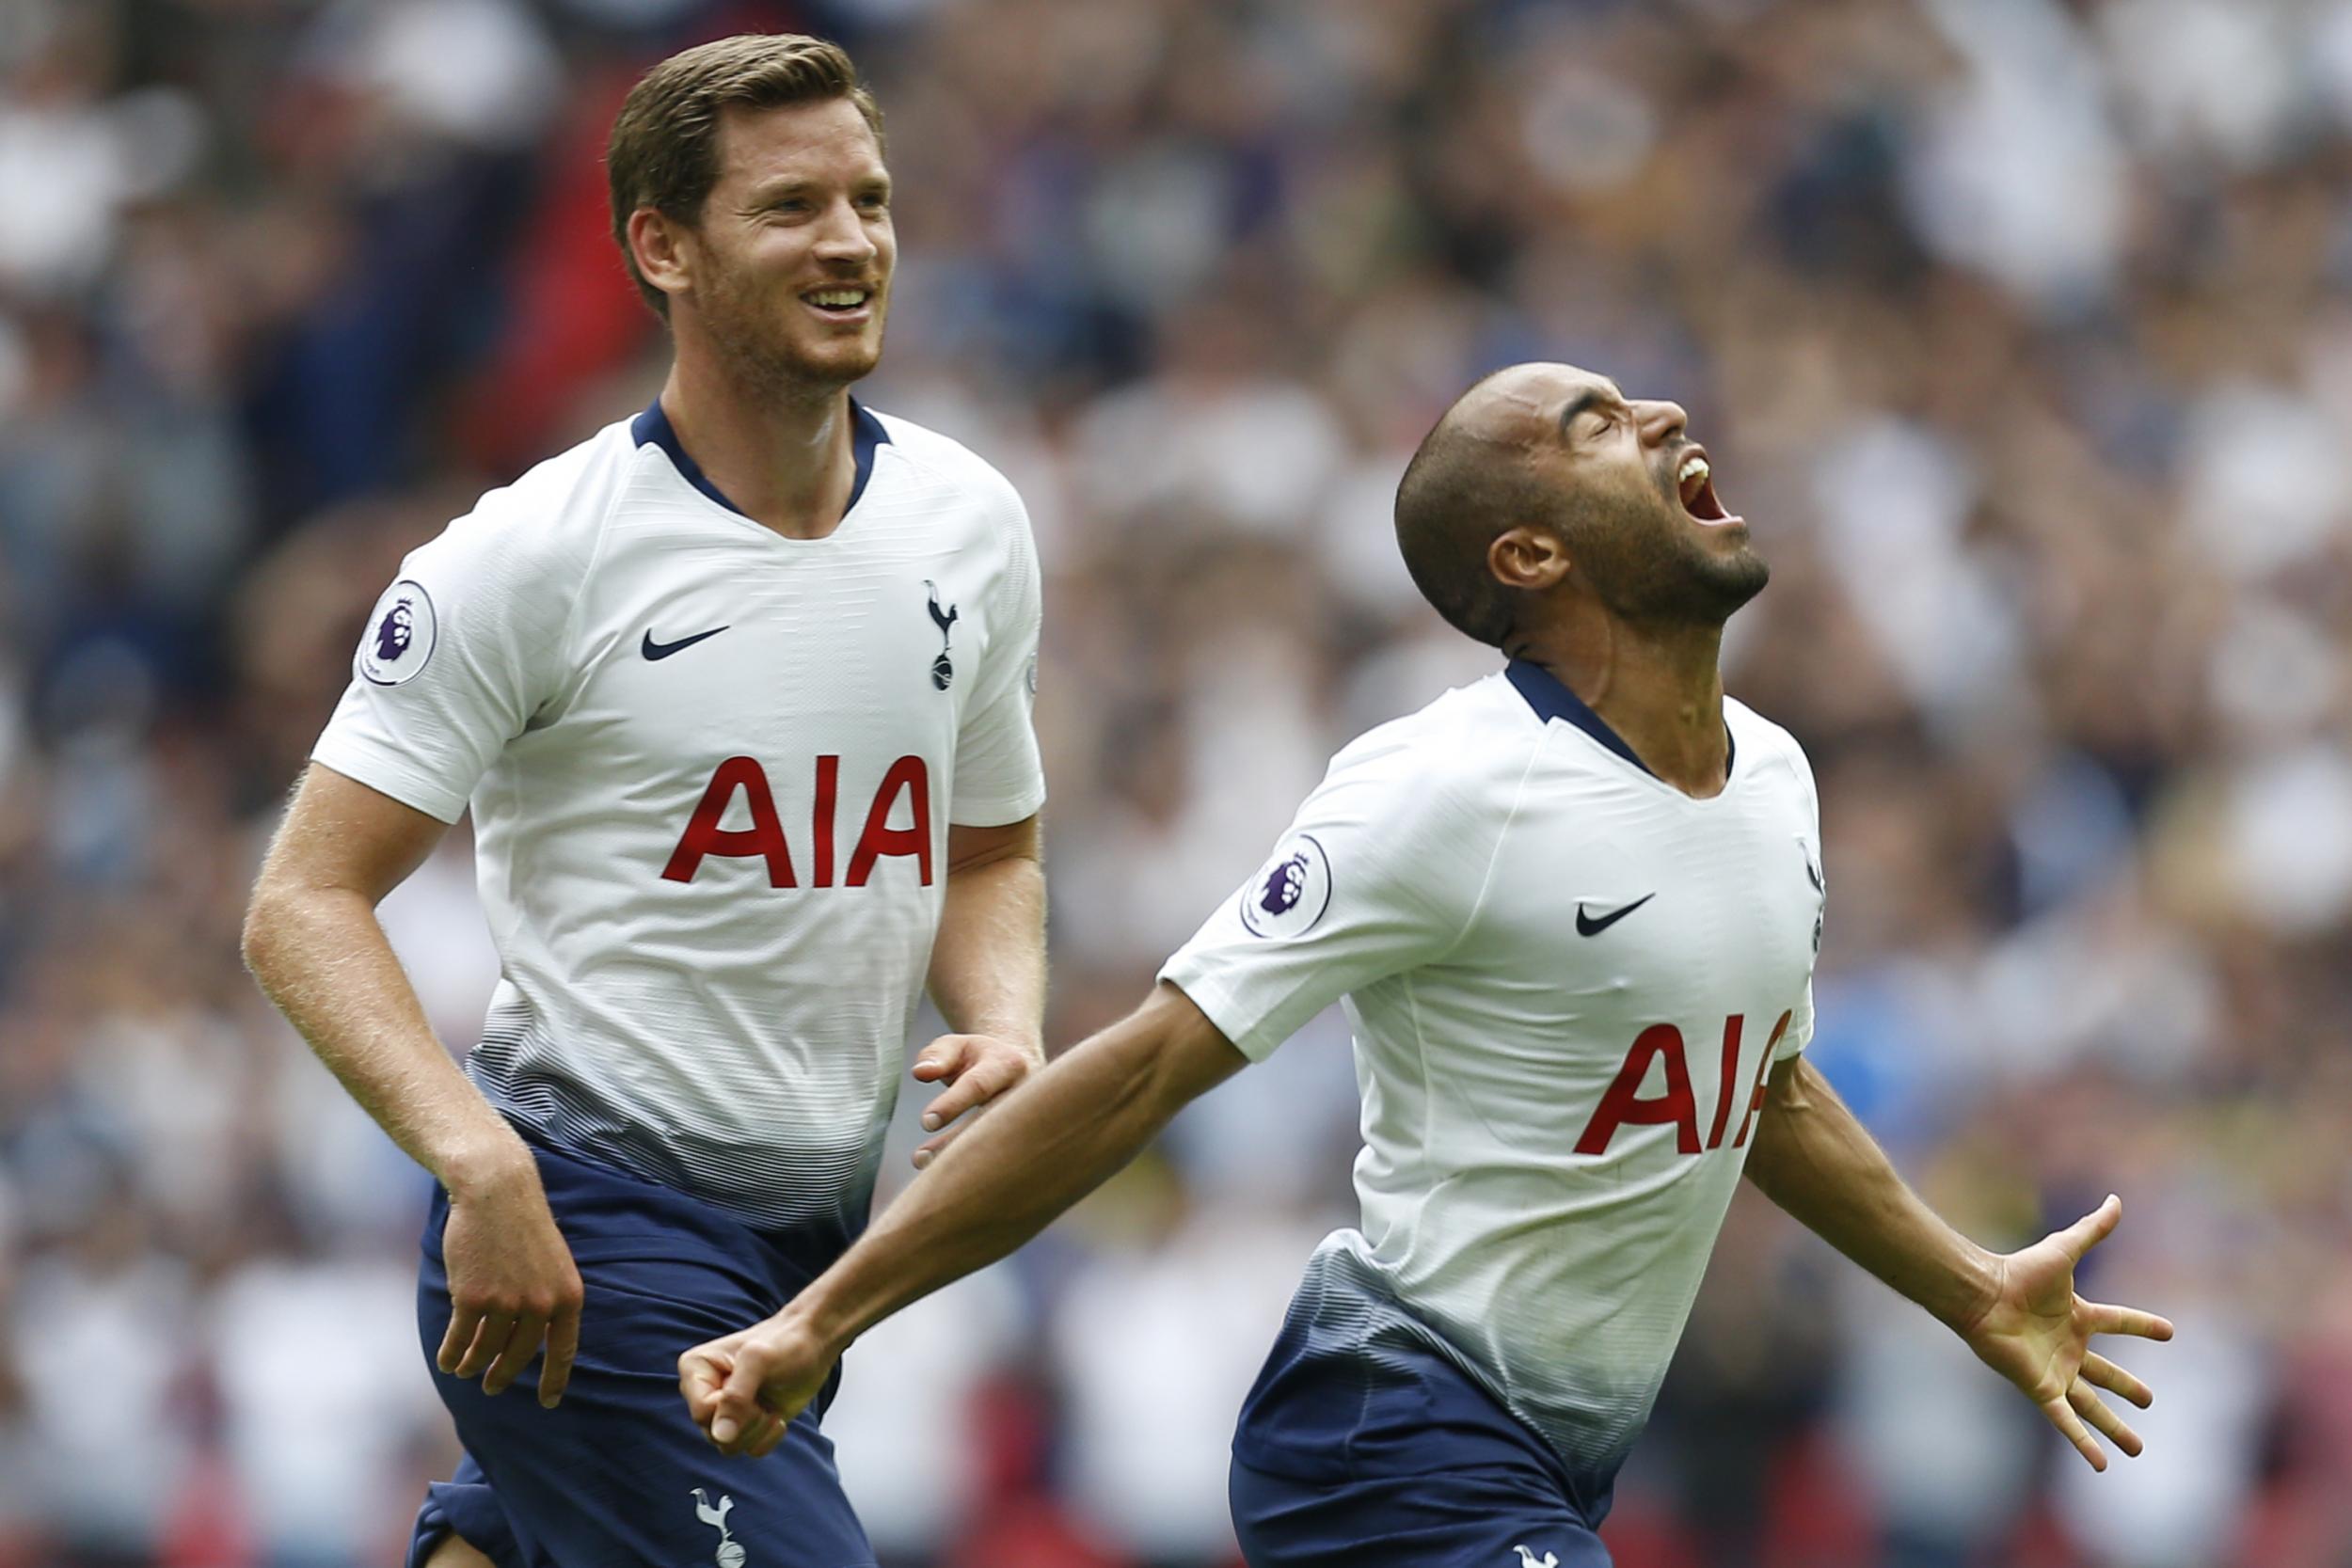 Tottenham head to Old Trafford with two wins out of two